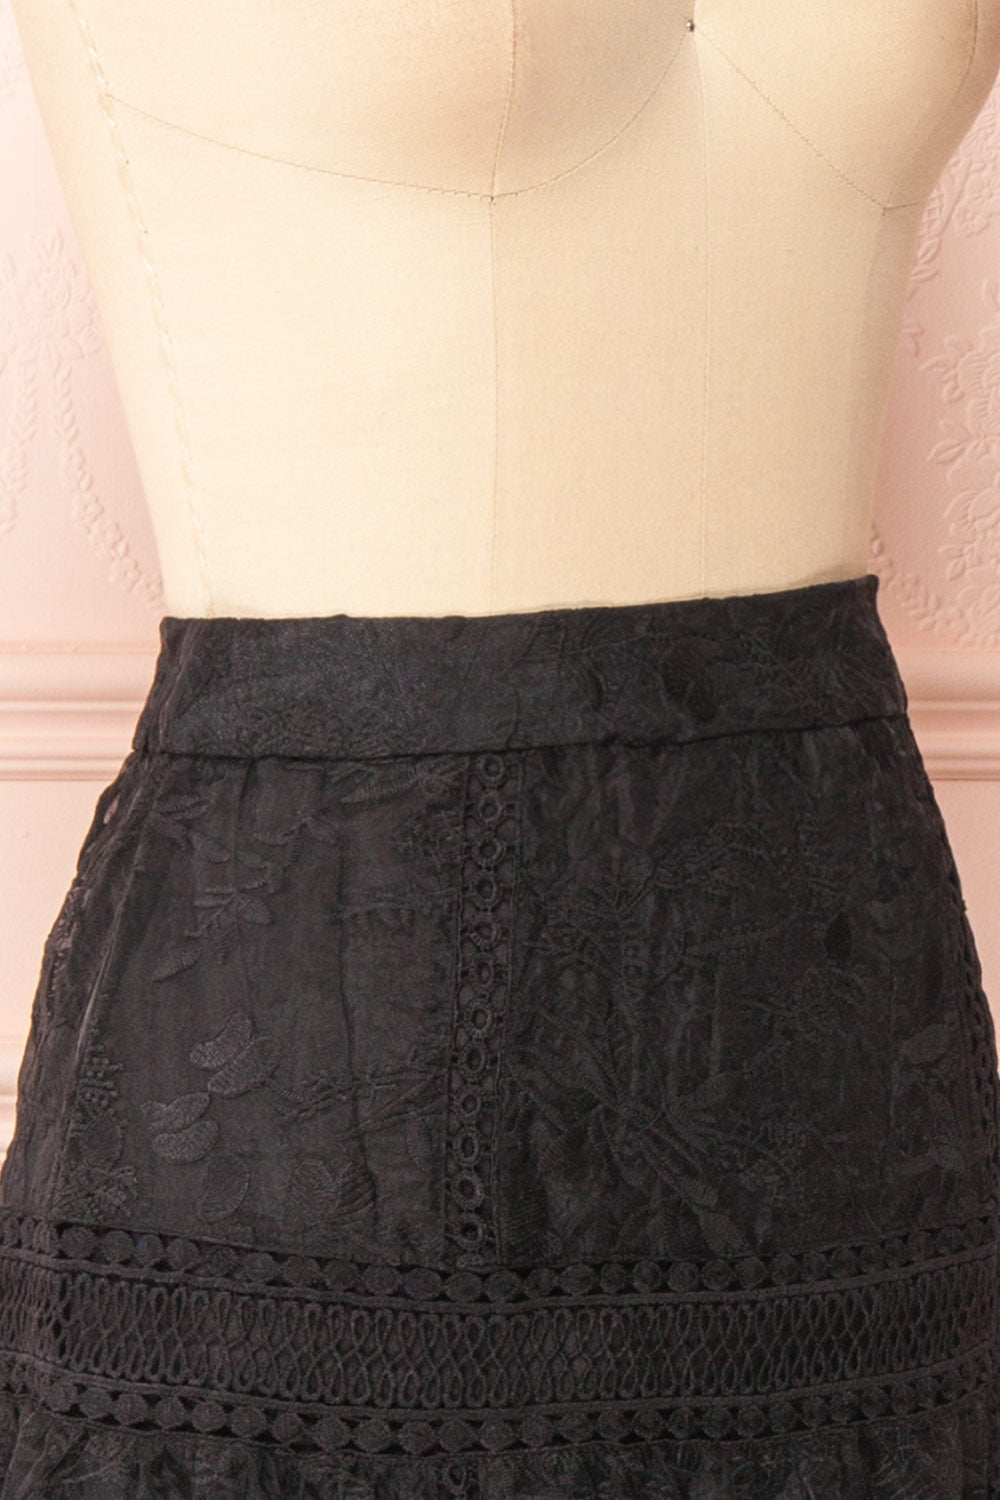 Knauttia Black Floral Embroidered Mesh Skirt | Boutique 1861 side close-up